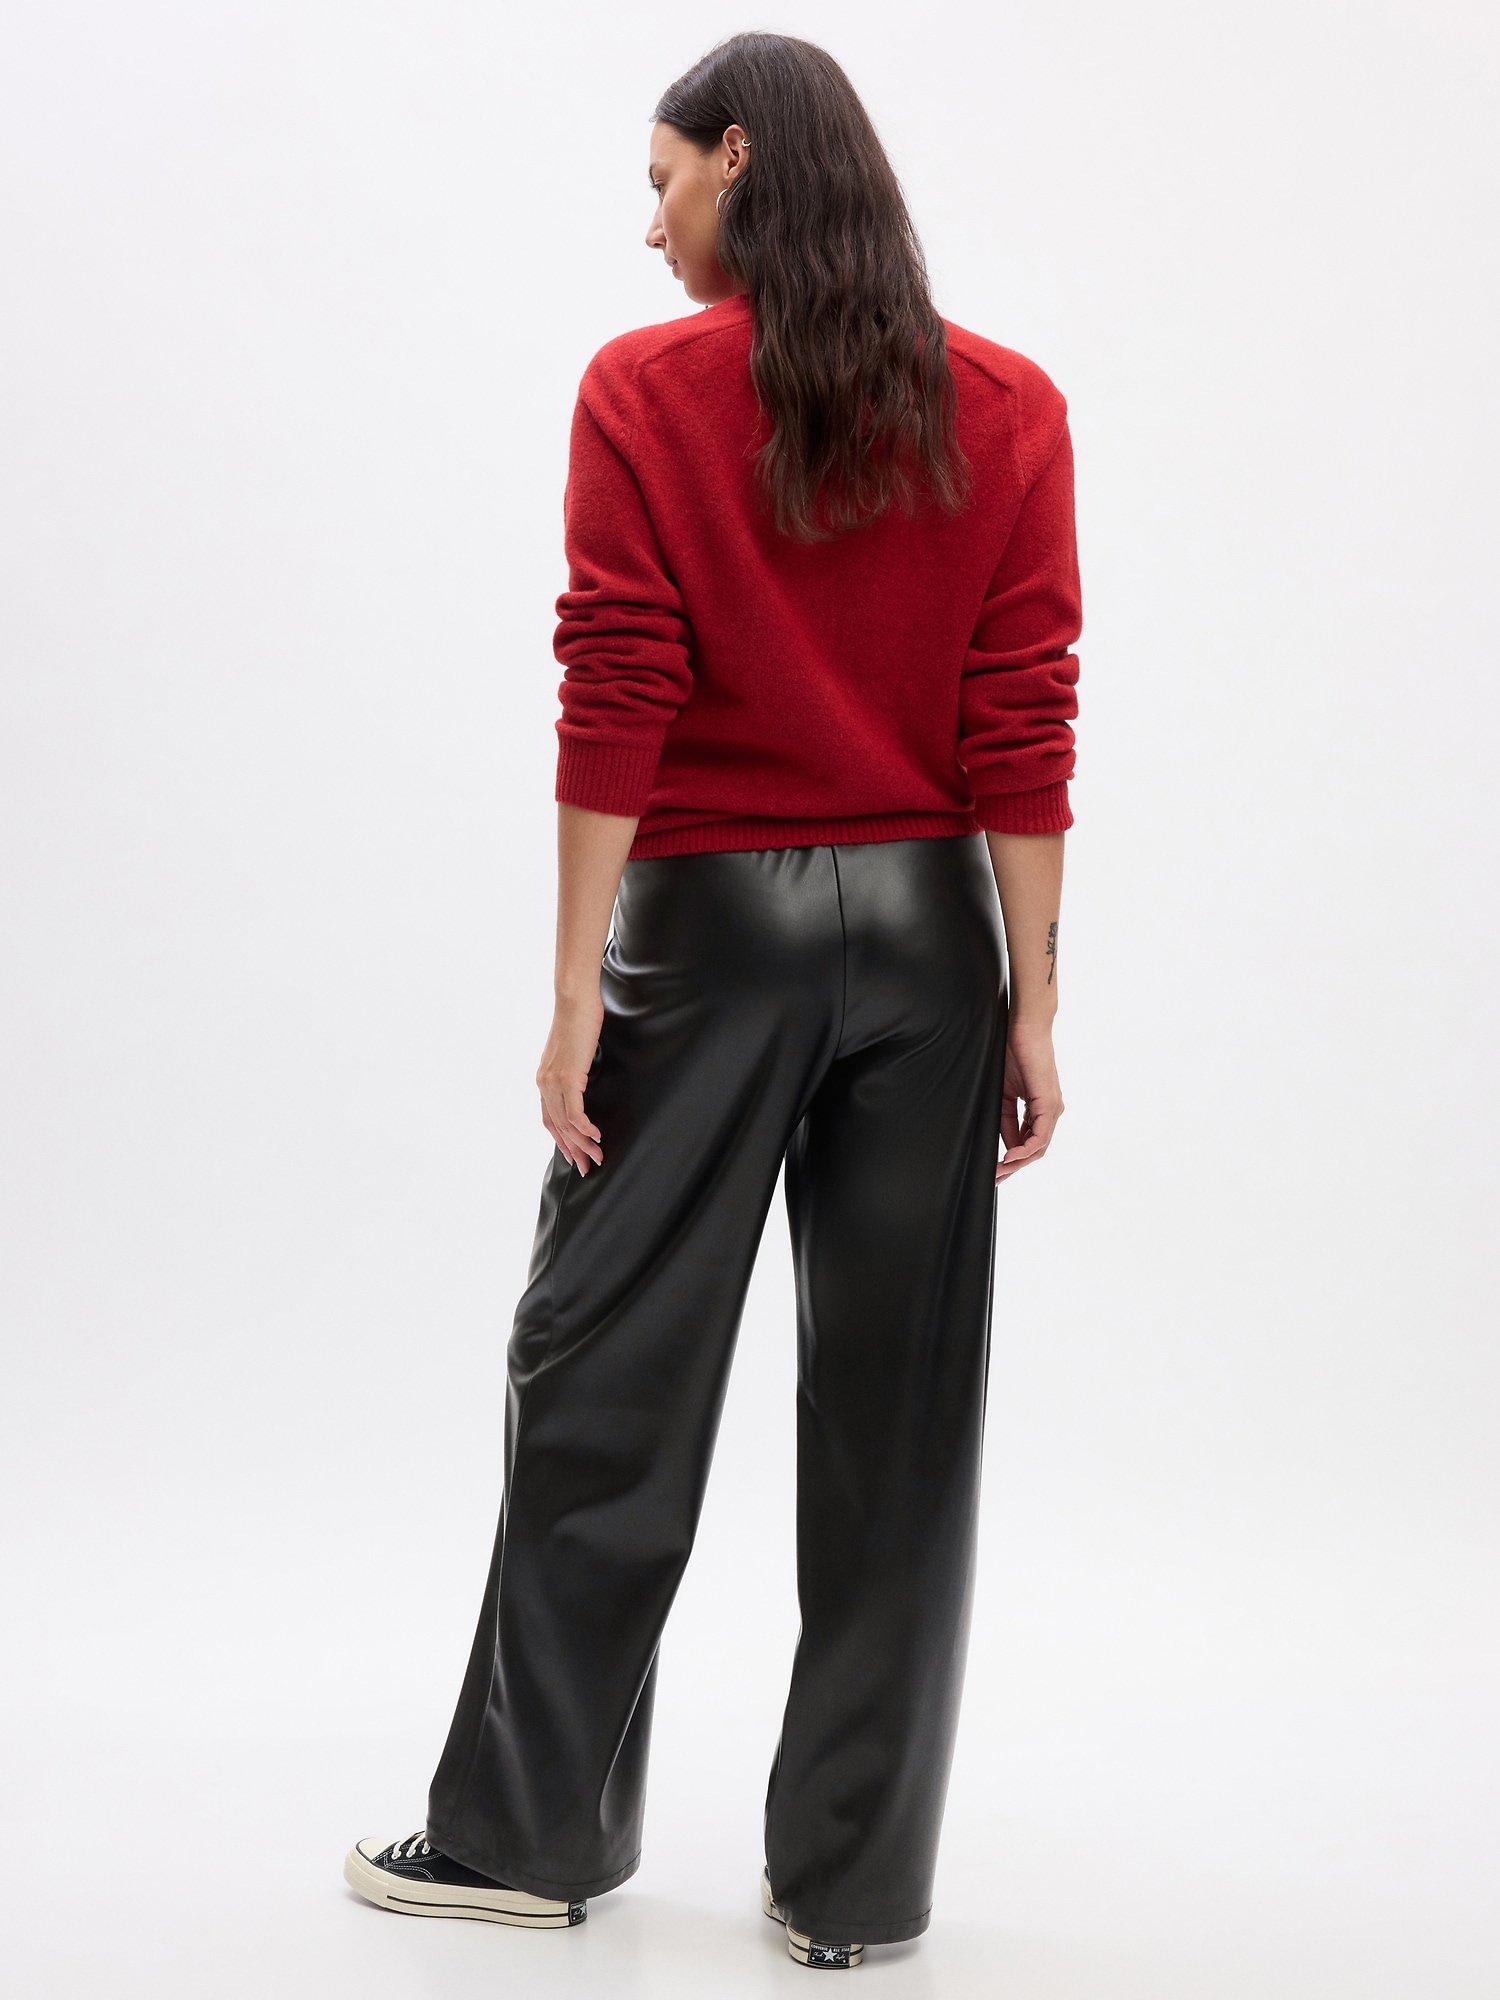 Zara Faux Leather Pants, 5 Huge Spring Trends You Can Shop for $50 or Less